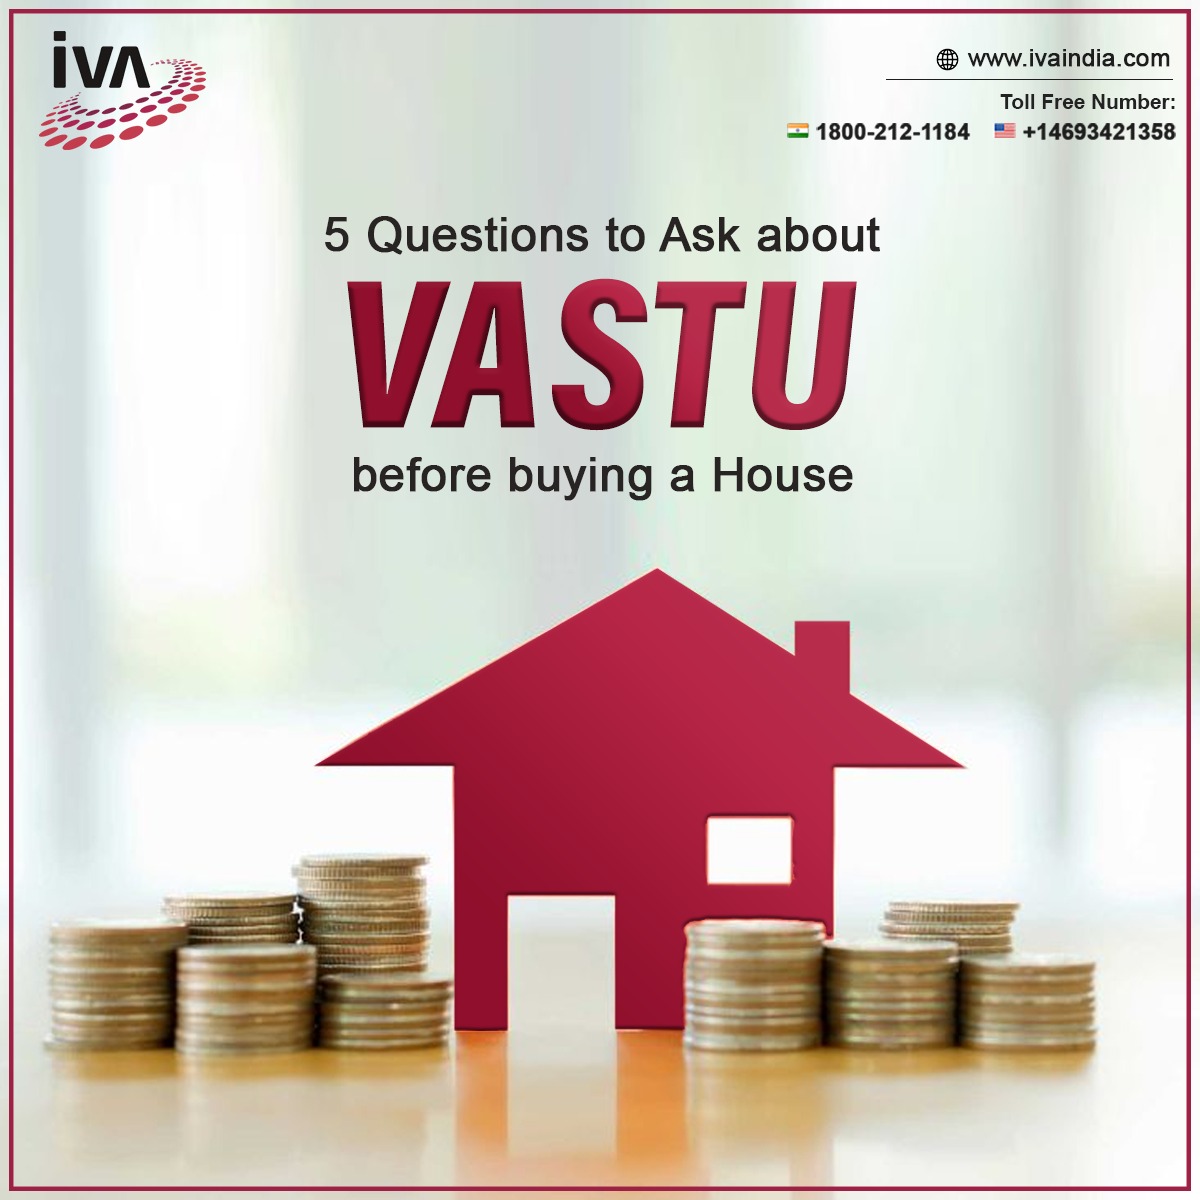 5 Questions to Ask About Vastu Before Buying a House